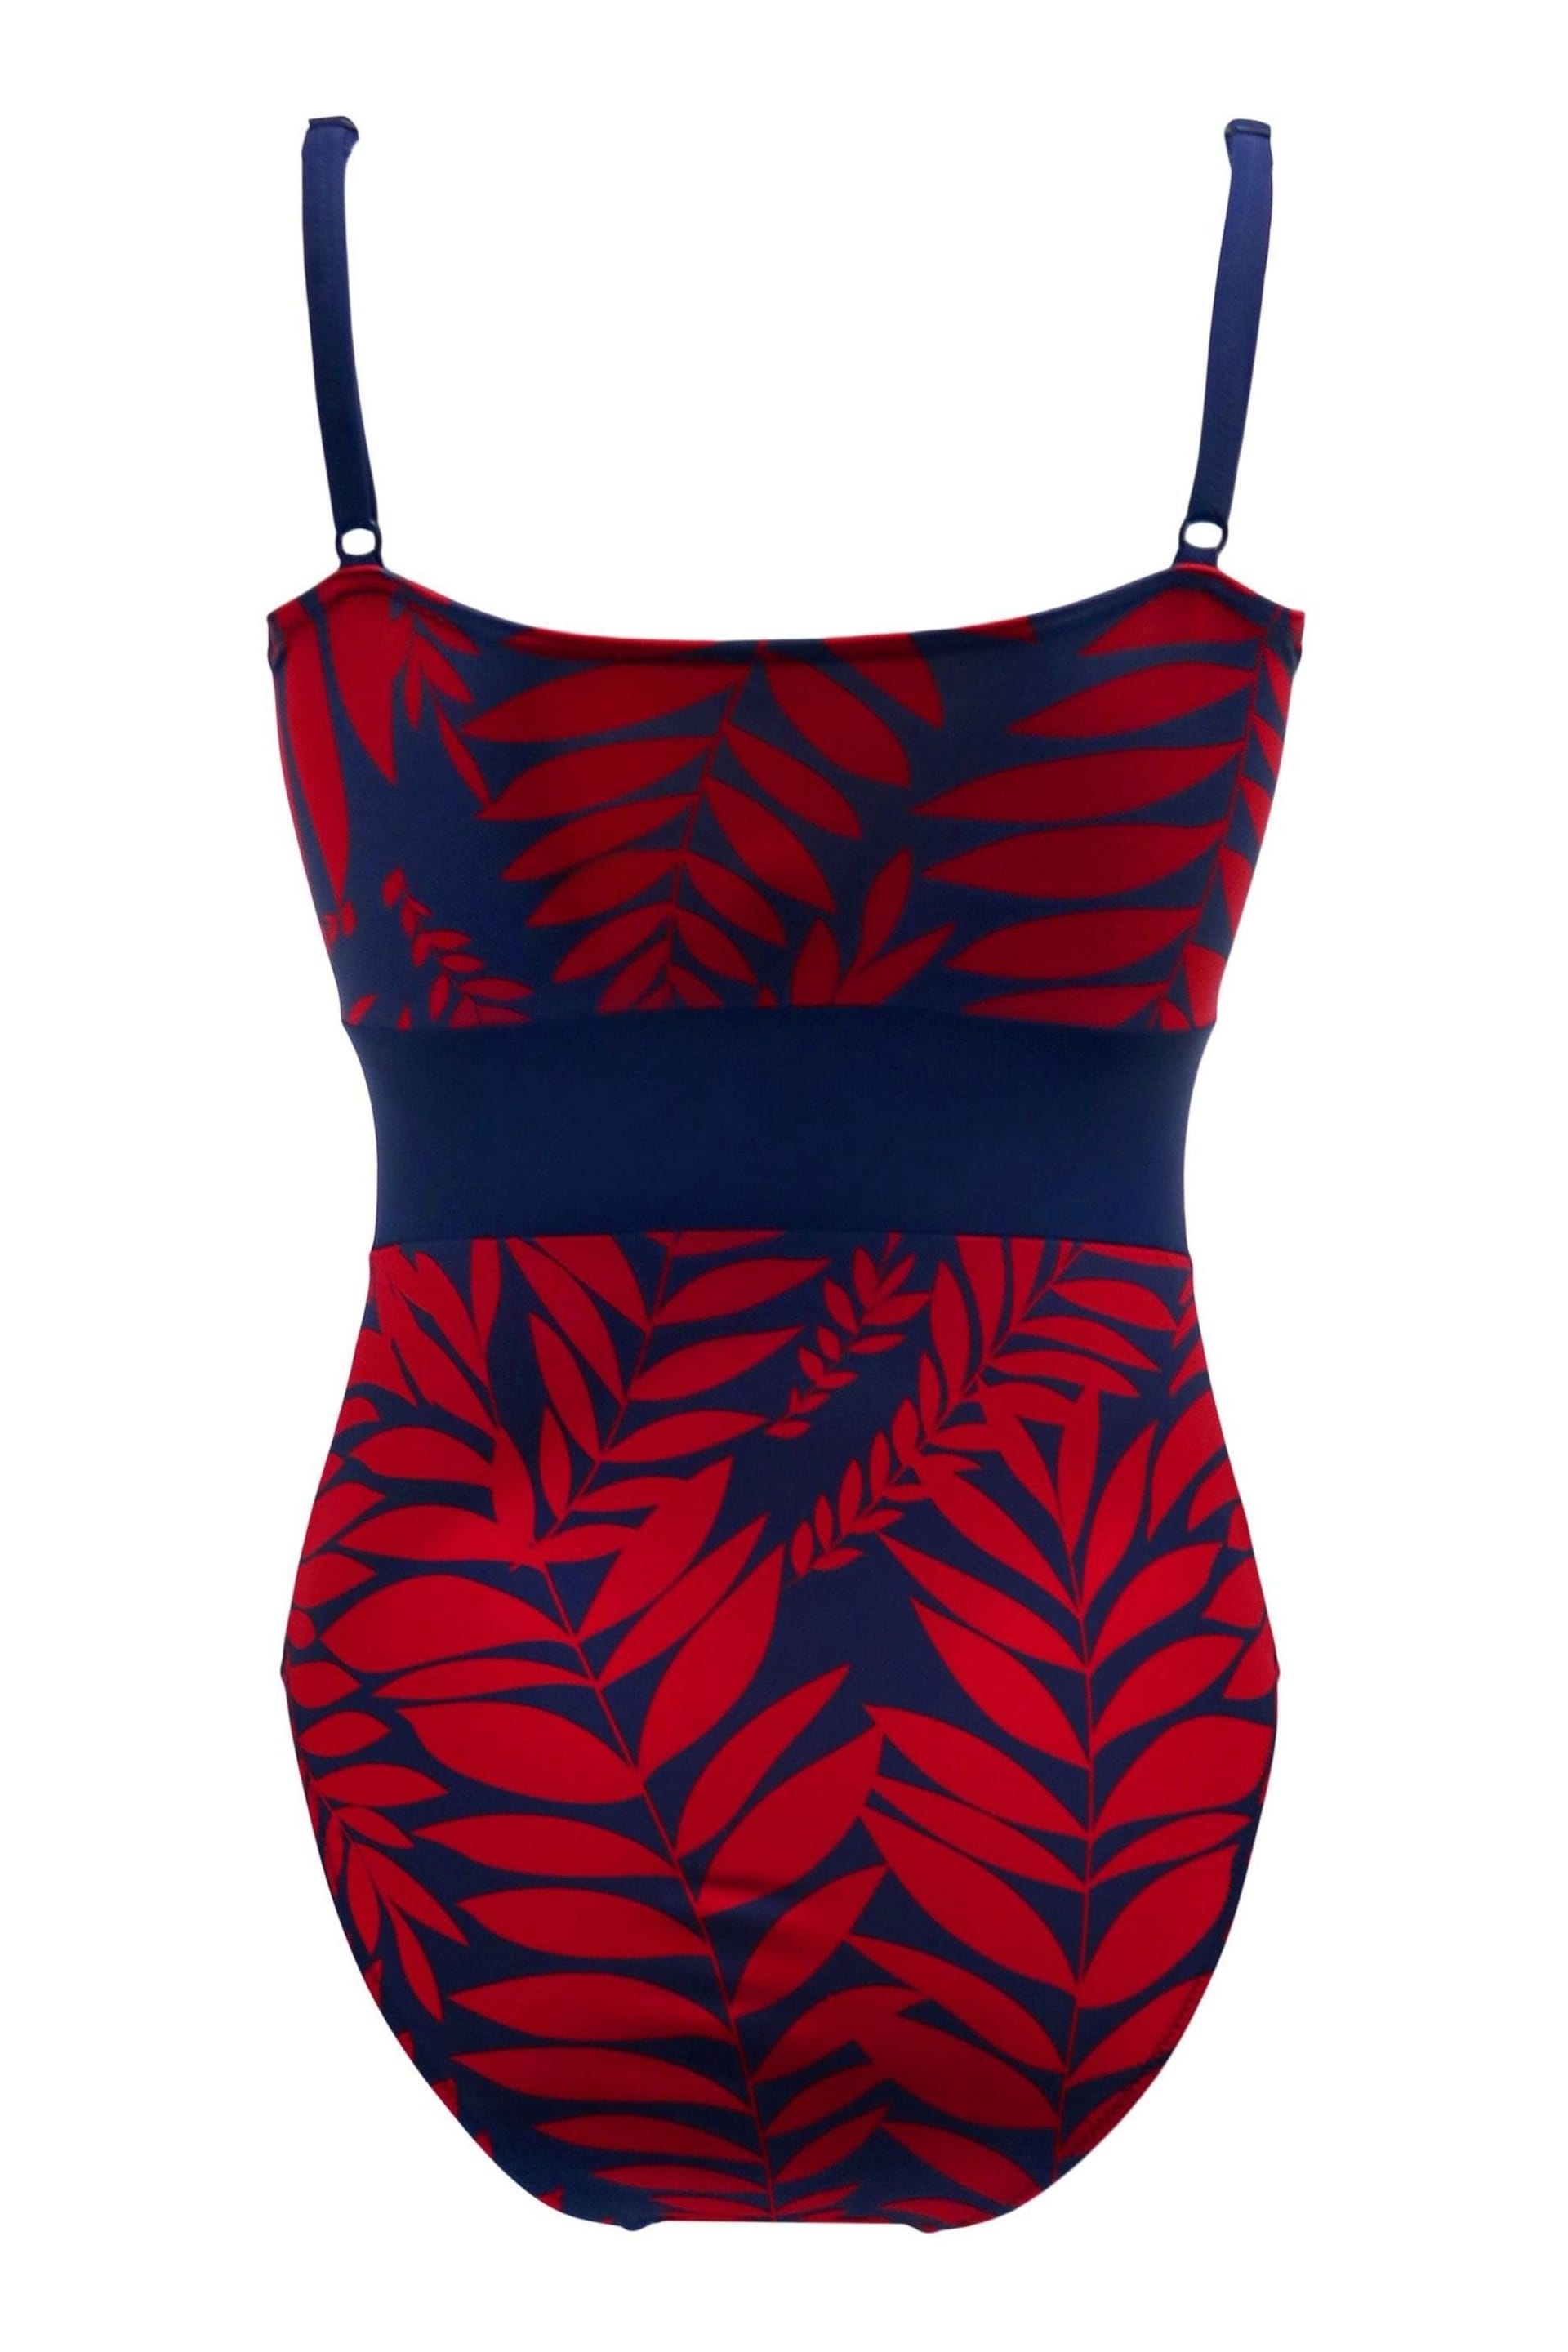 Pour Moi Blue Palermo Panelled Control Swimsuit - Image 4 of 4